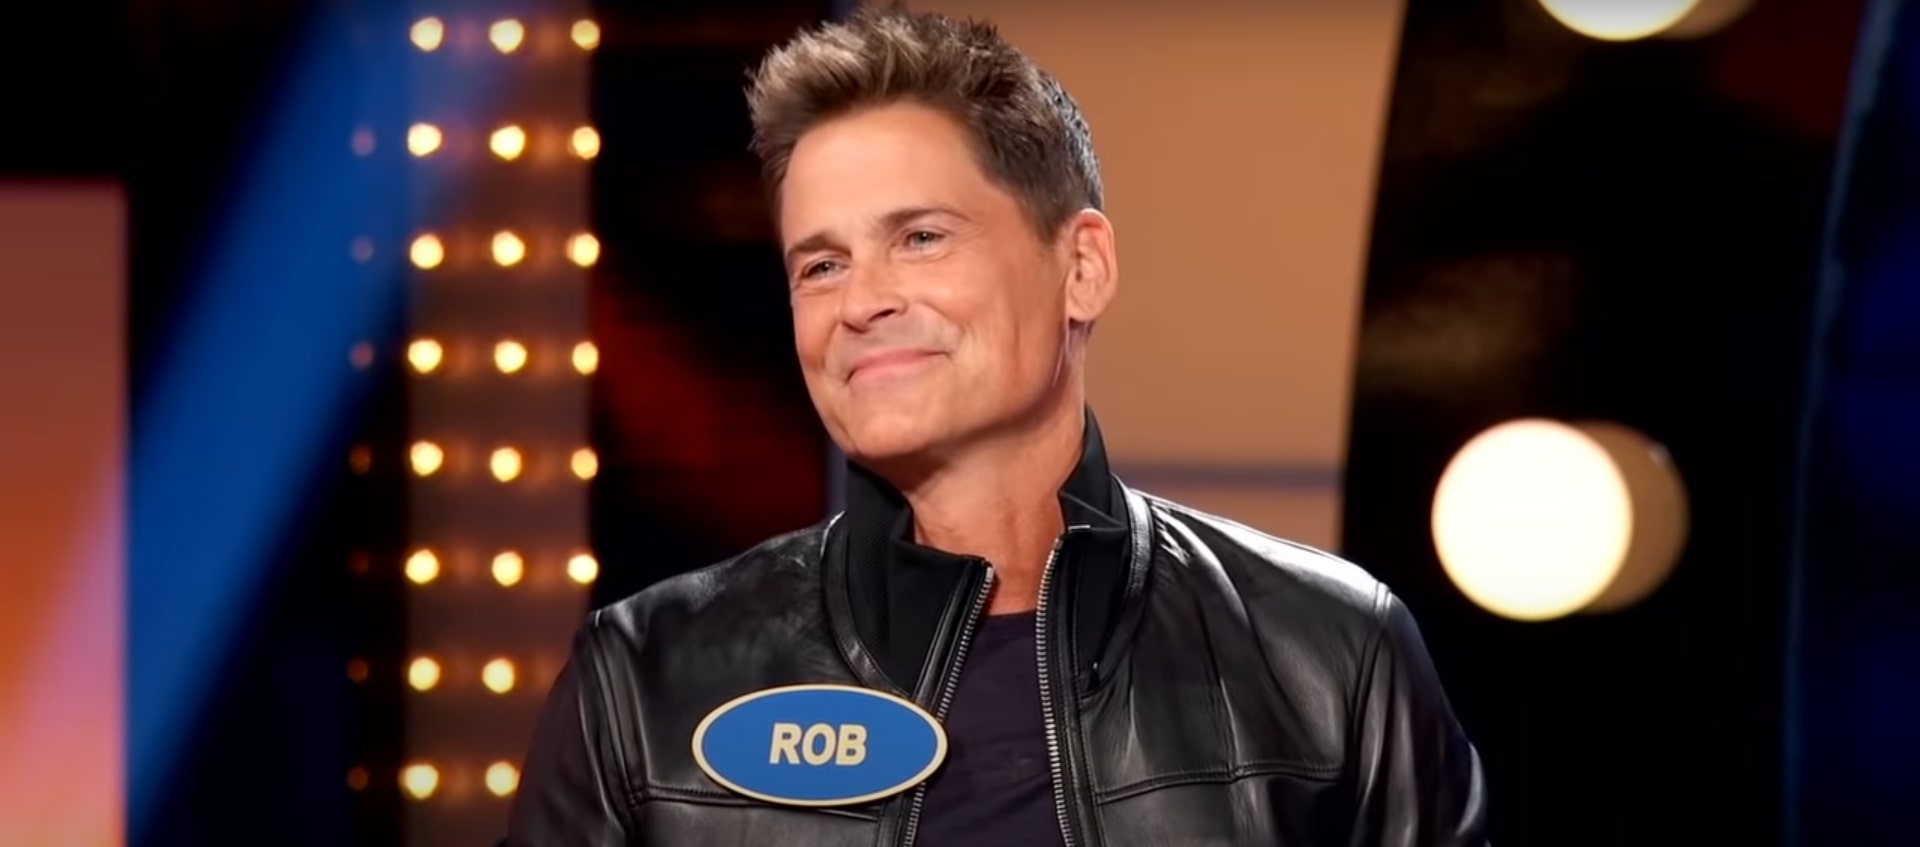 Is Rob Lowe Still Married? Does He Have Children?